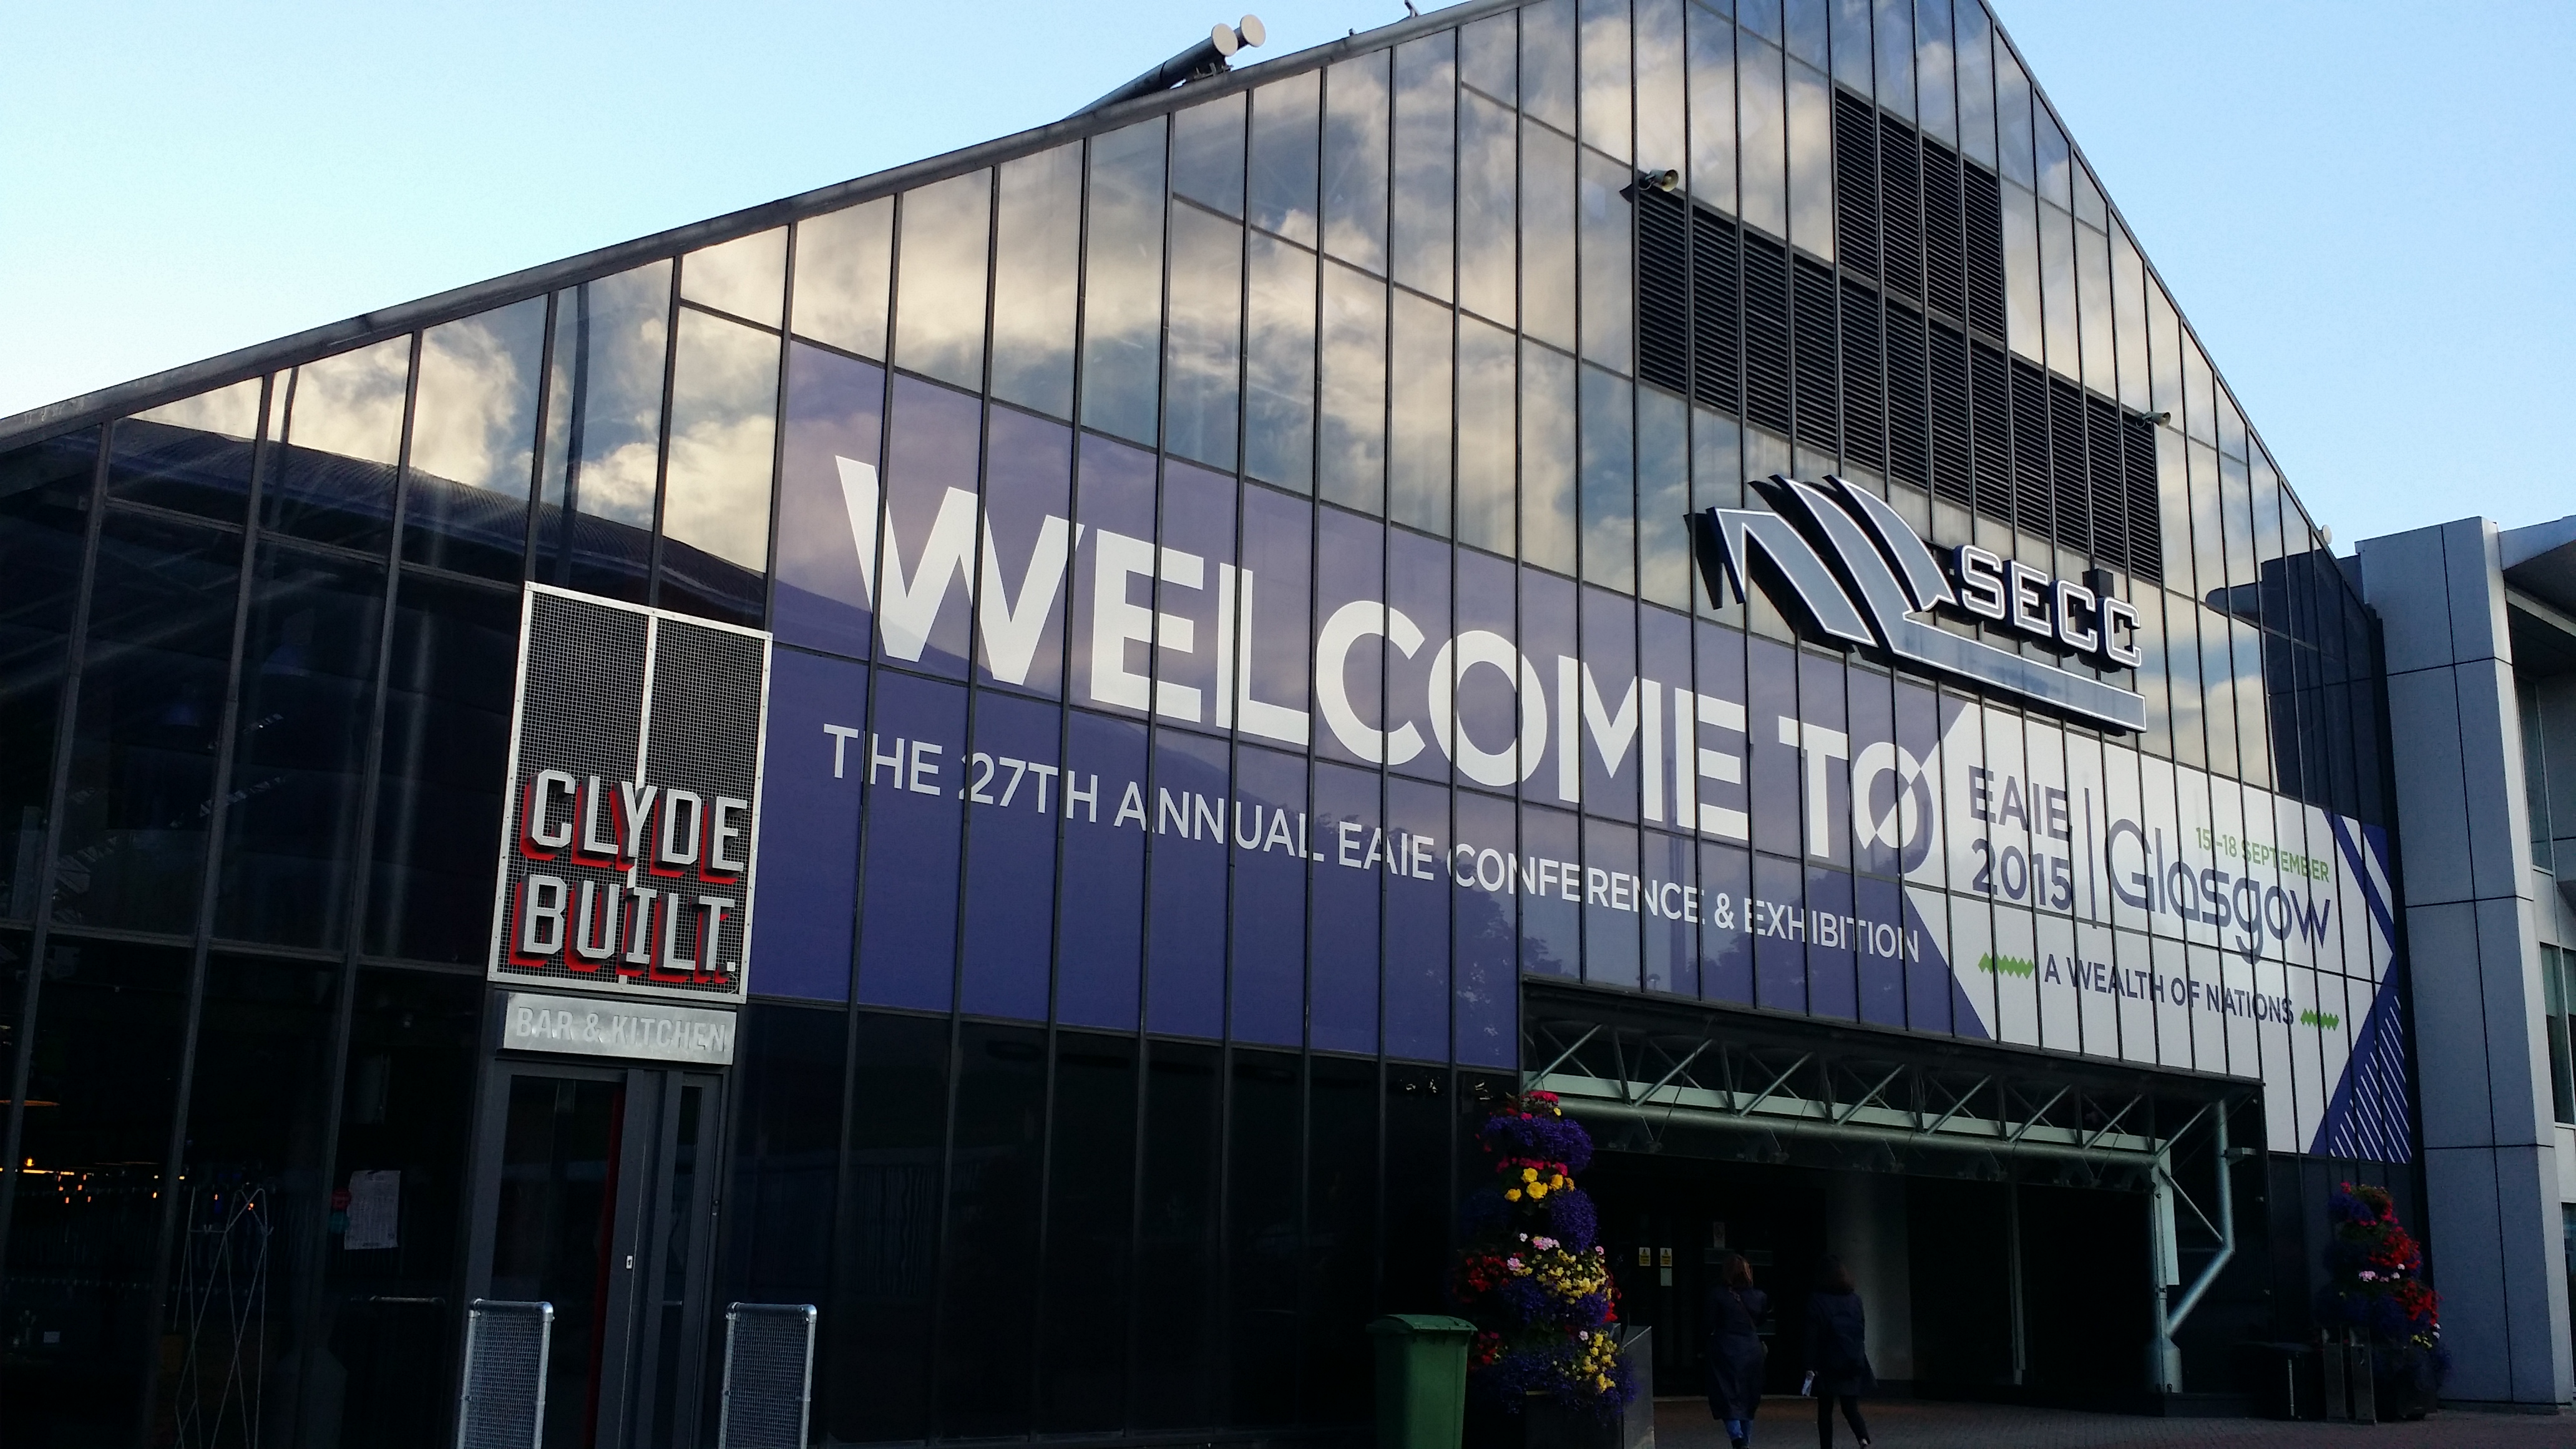 Marching into the world of higher education: 2015 EAIE Conference